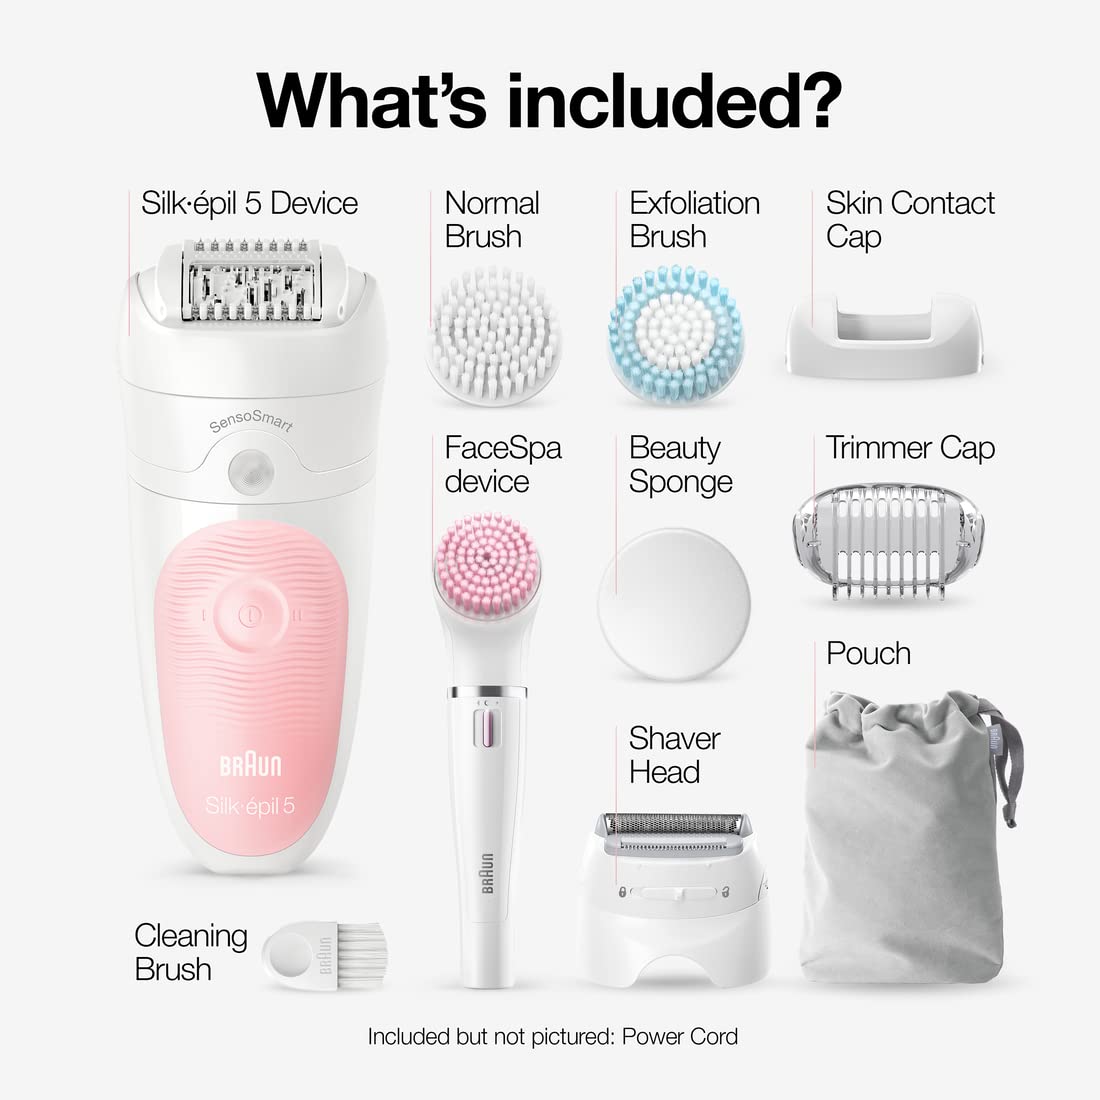 Braun SE5-895 Epilator, Hair Removal Device, Epilator for Women, Includes Shaver and Facial Cleansing Exfoliator Brush Attachments, Waterproof, Cordless and Rechargeable